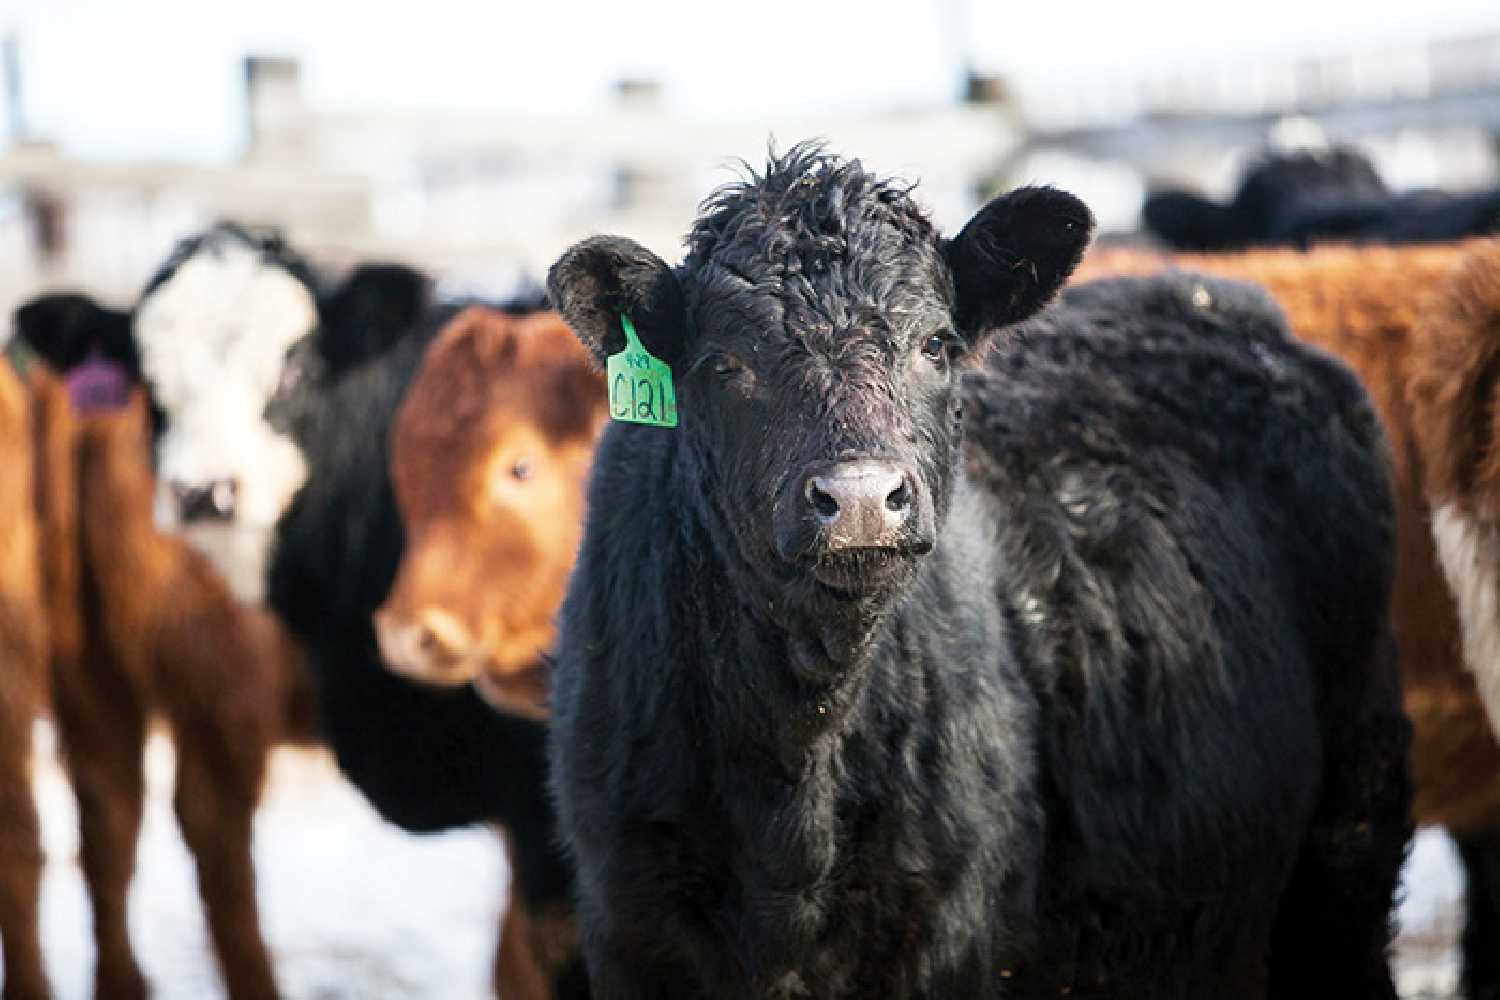 The Government of Saskatchewan’s funding will provide eligible producers with up to $80 per head to maintain breeding stock for beef cattle, bison, horse, elk, deer, sheep and goats.